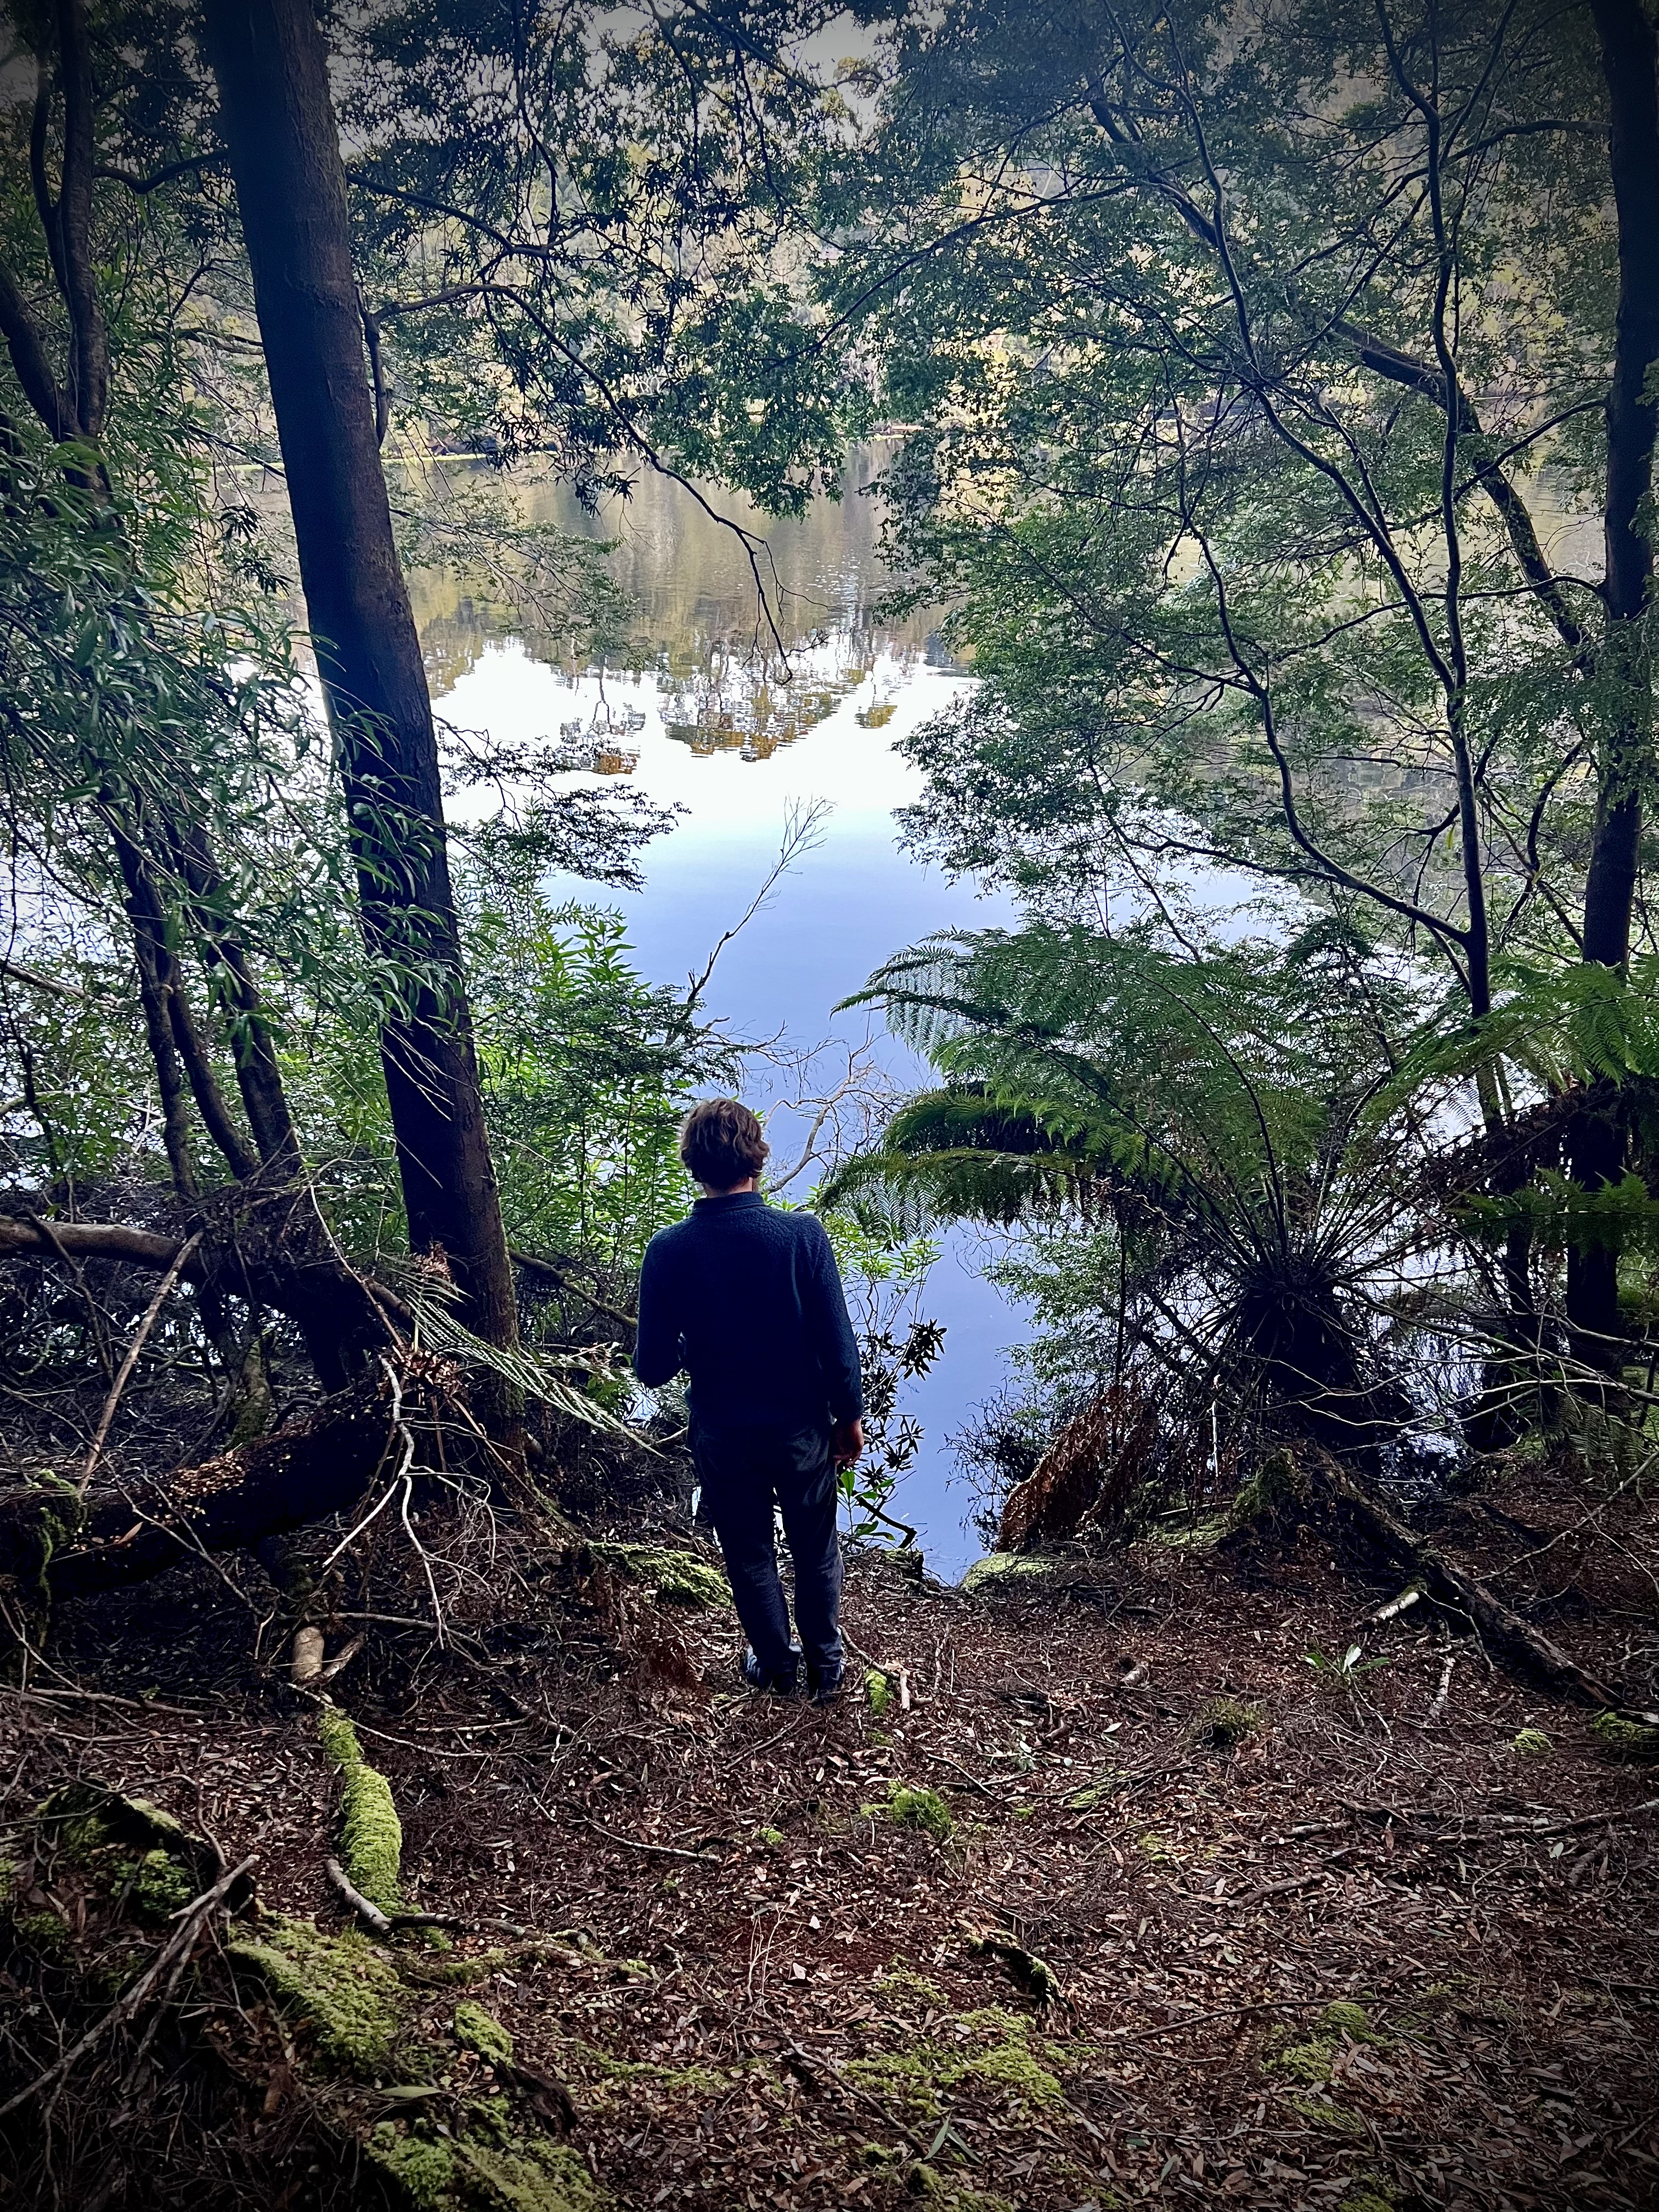 A person wearing a blue jumper stands looking at the river